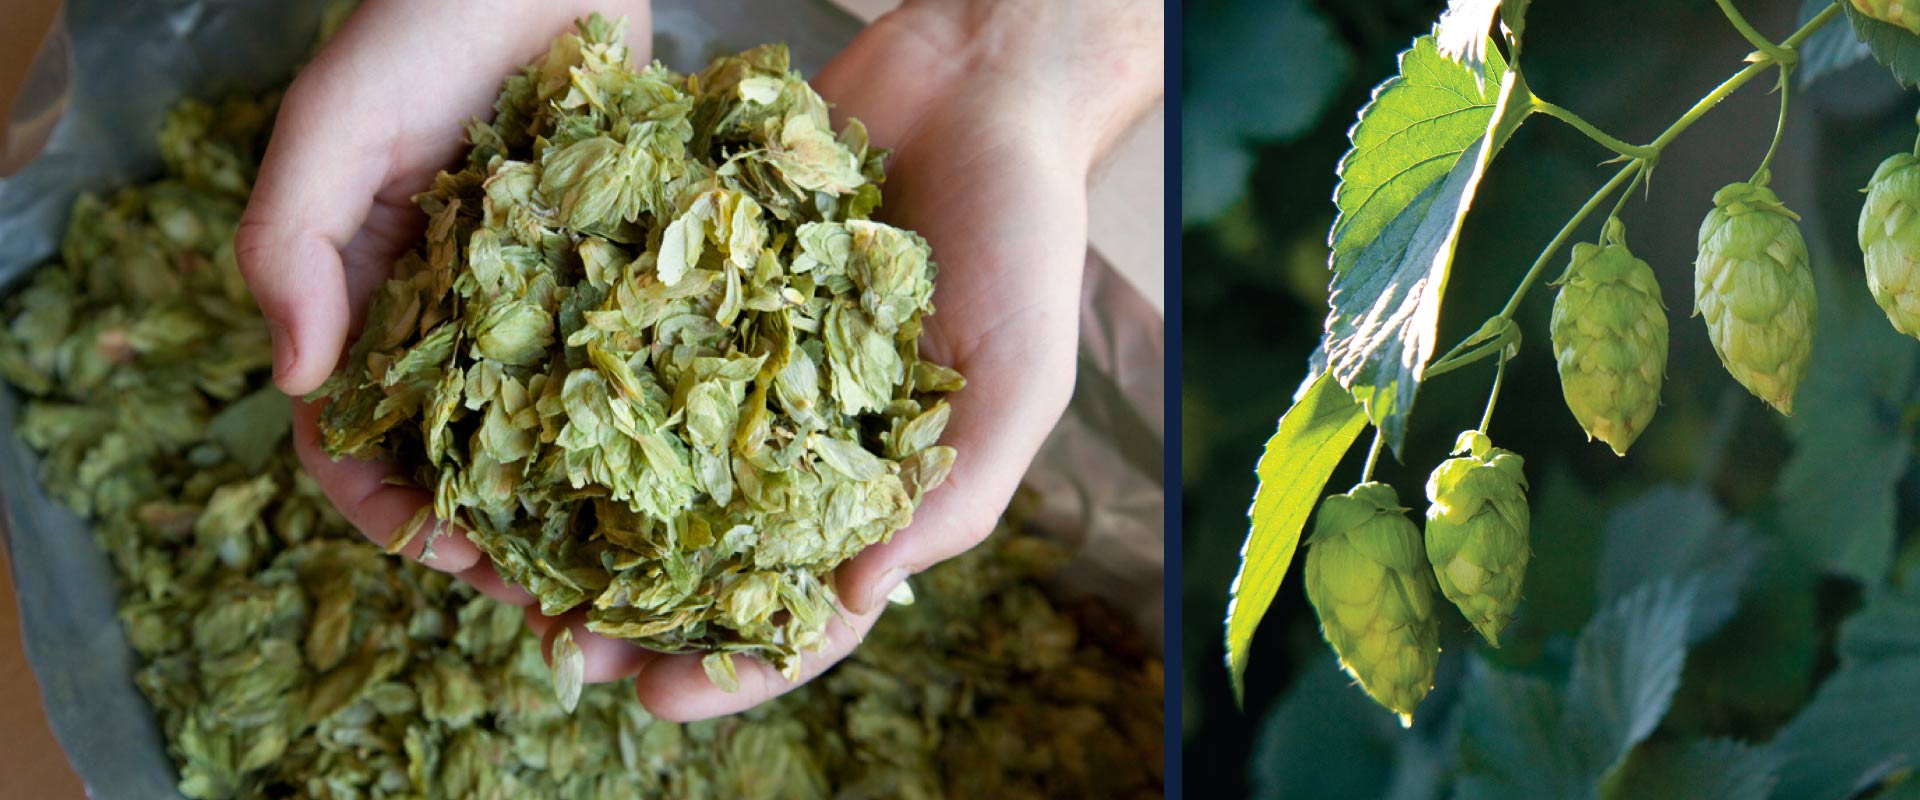 Golden Valley Brewery produces handcrafted beers using on the highest quality hops.